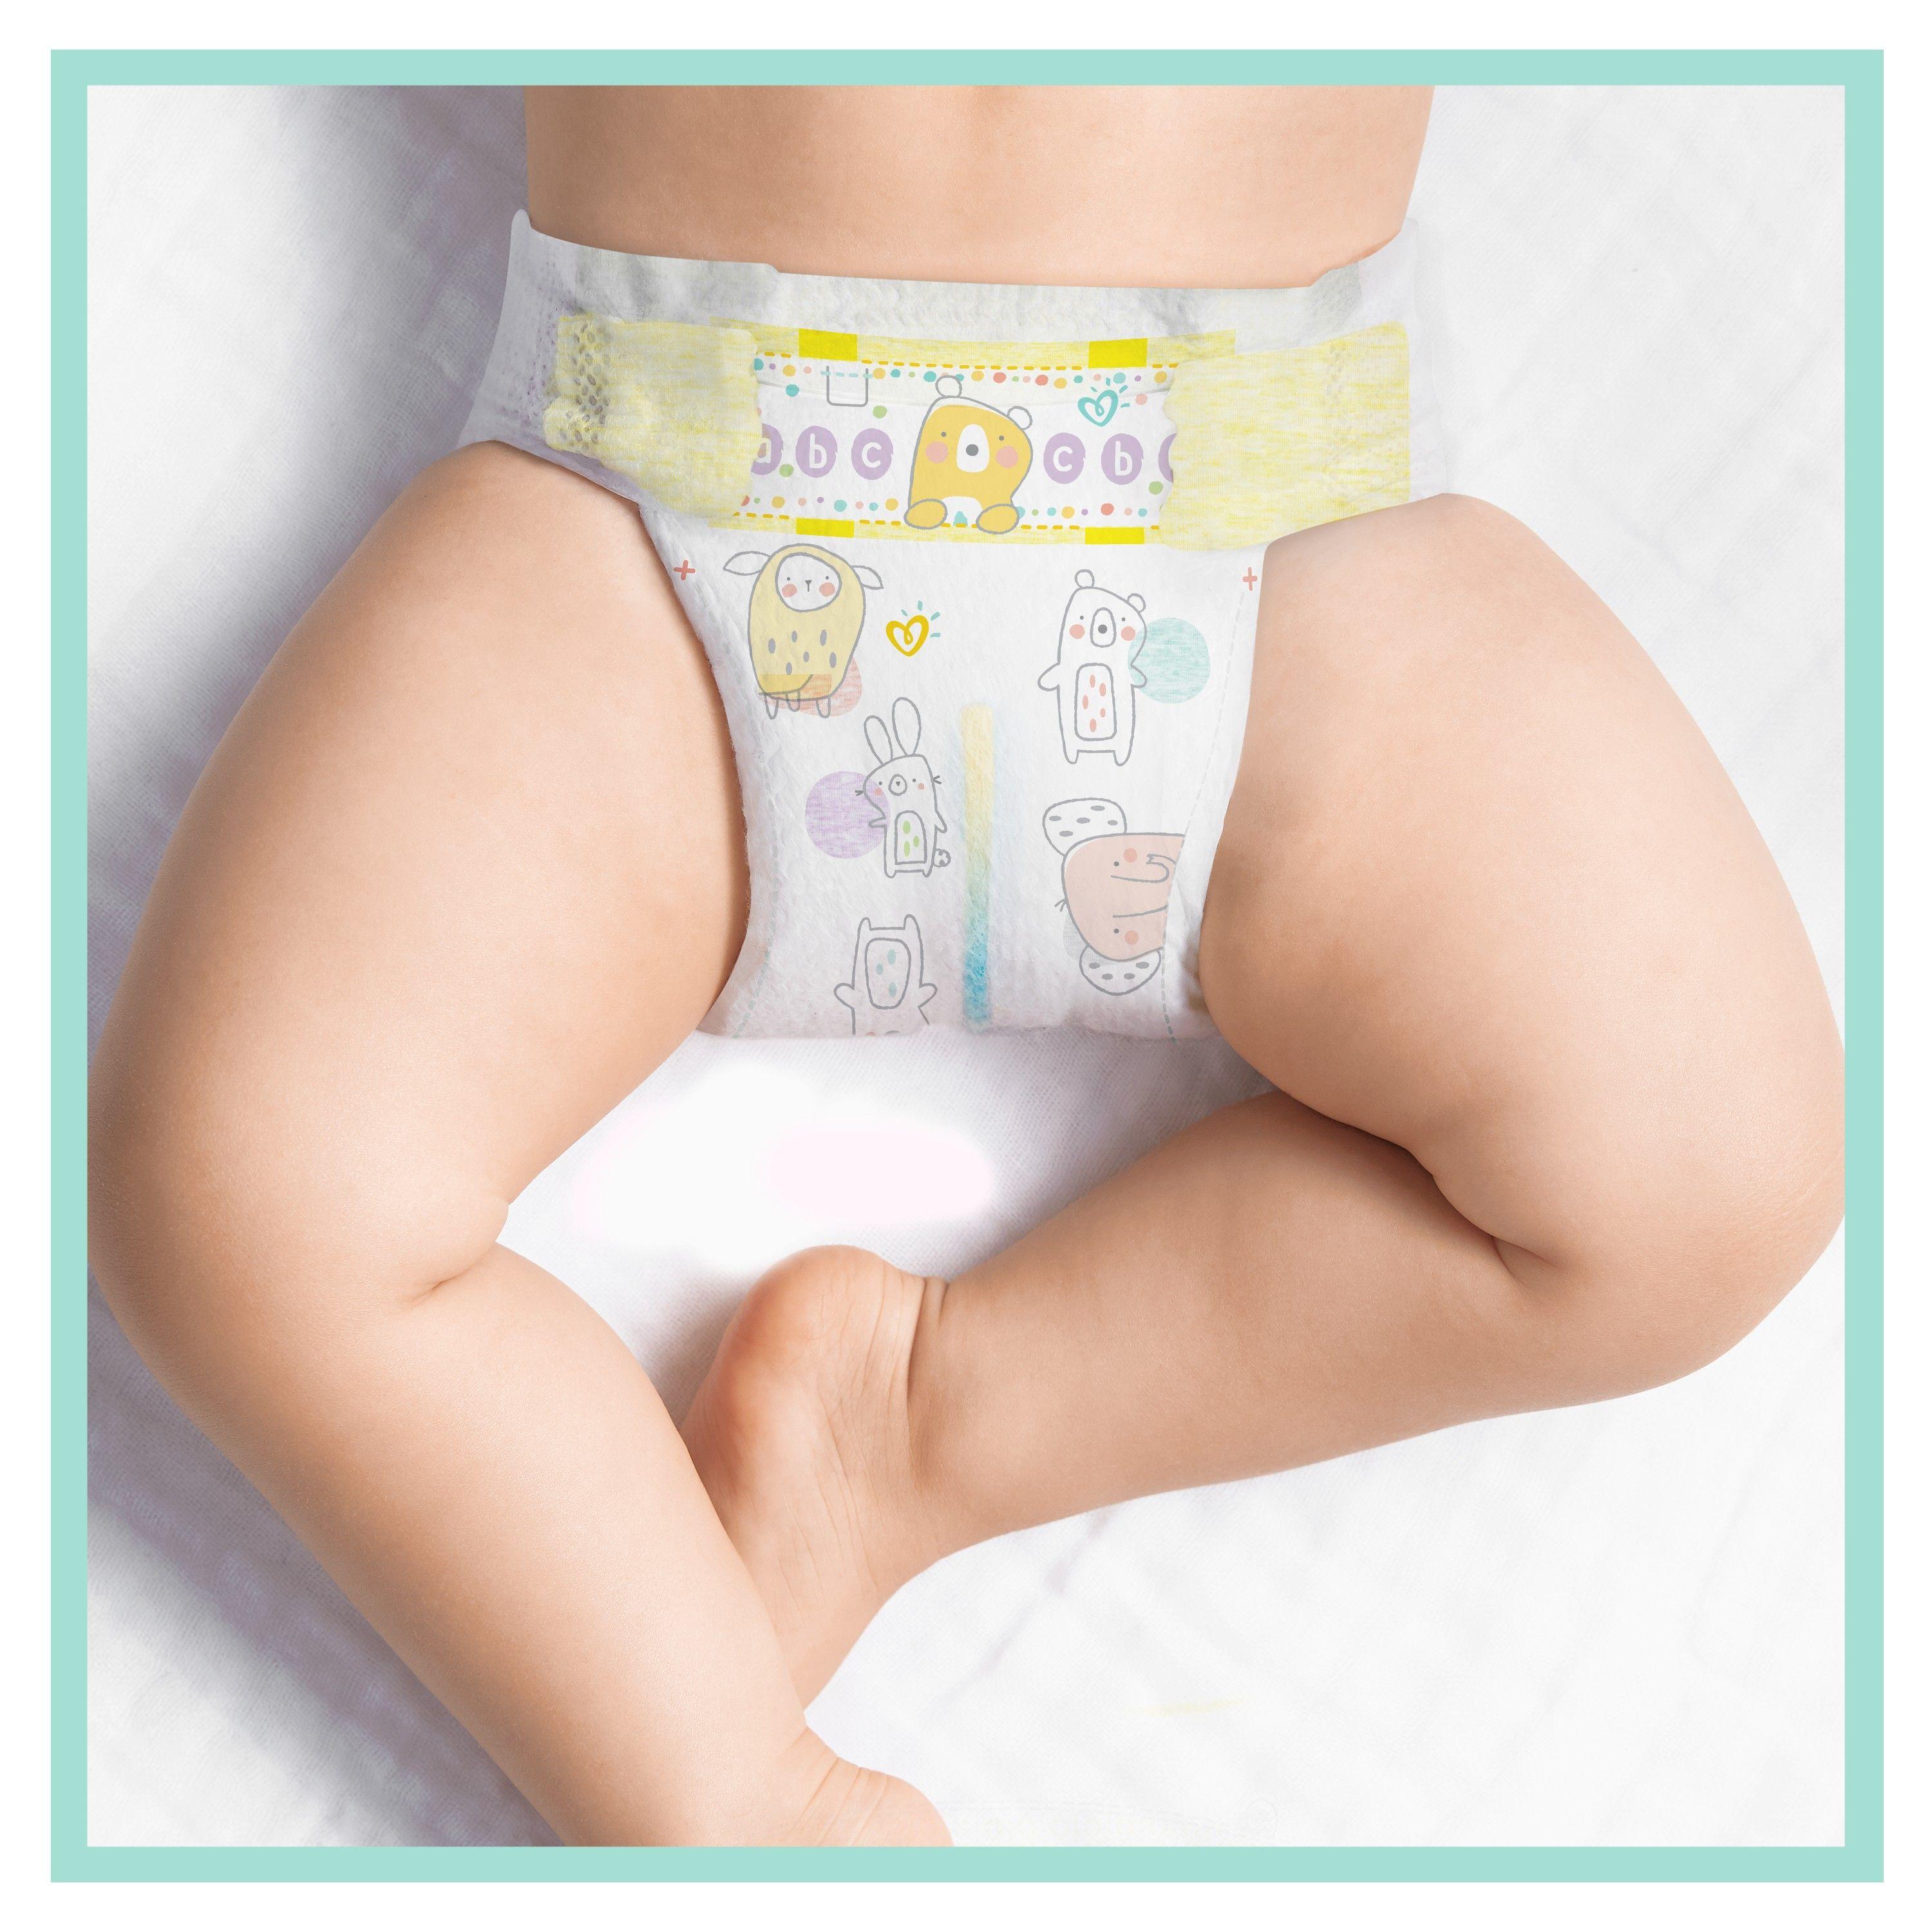 Pampers Premium Protection Size 5, Nappy x136, 11kg-16kg